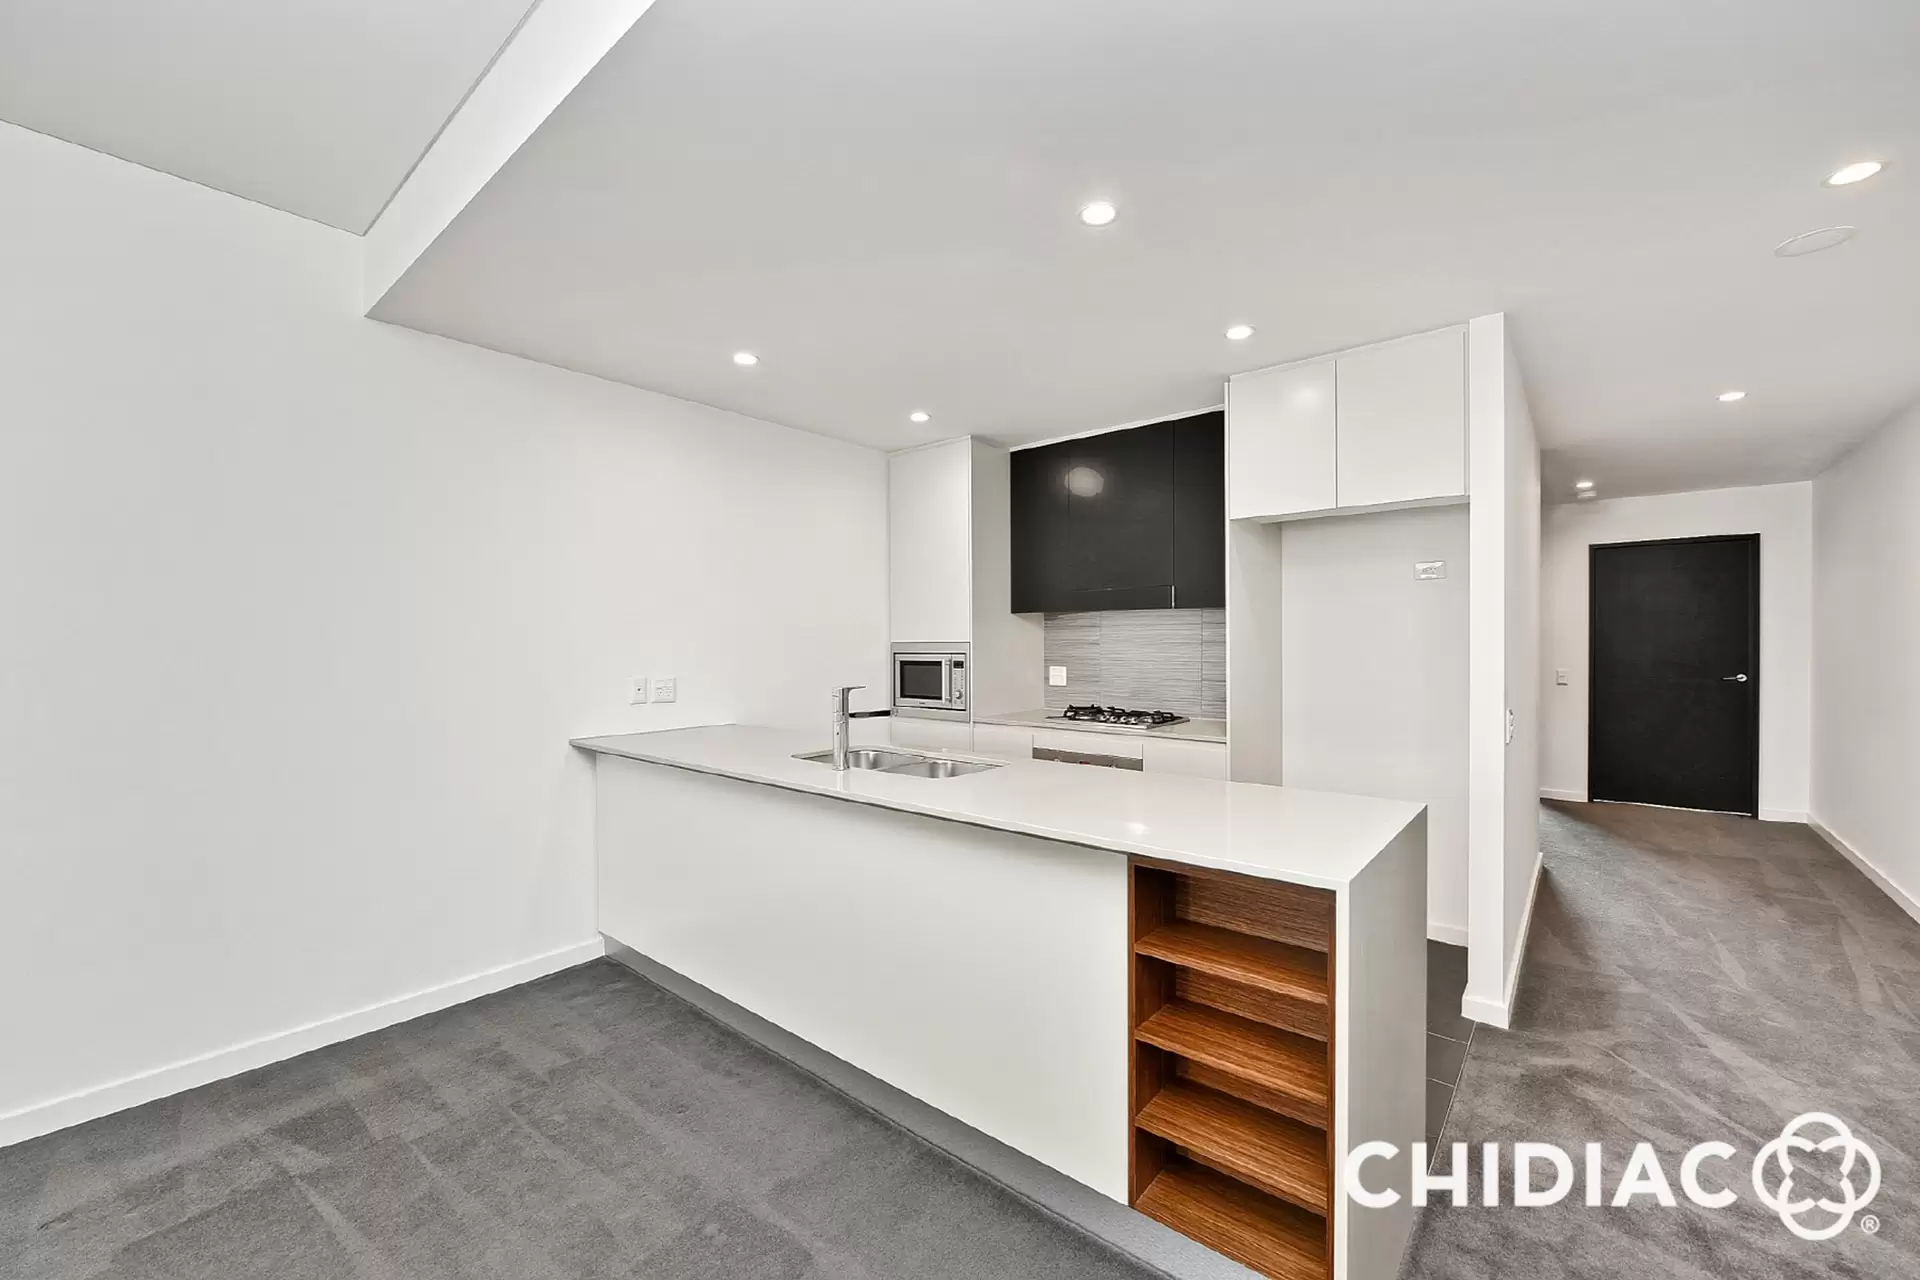 411/12 Nuvolari Place, Wentworth Point Leased by Chidiac Realty - image 1